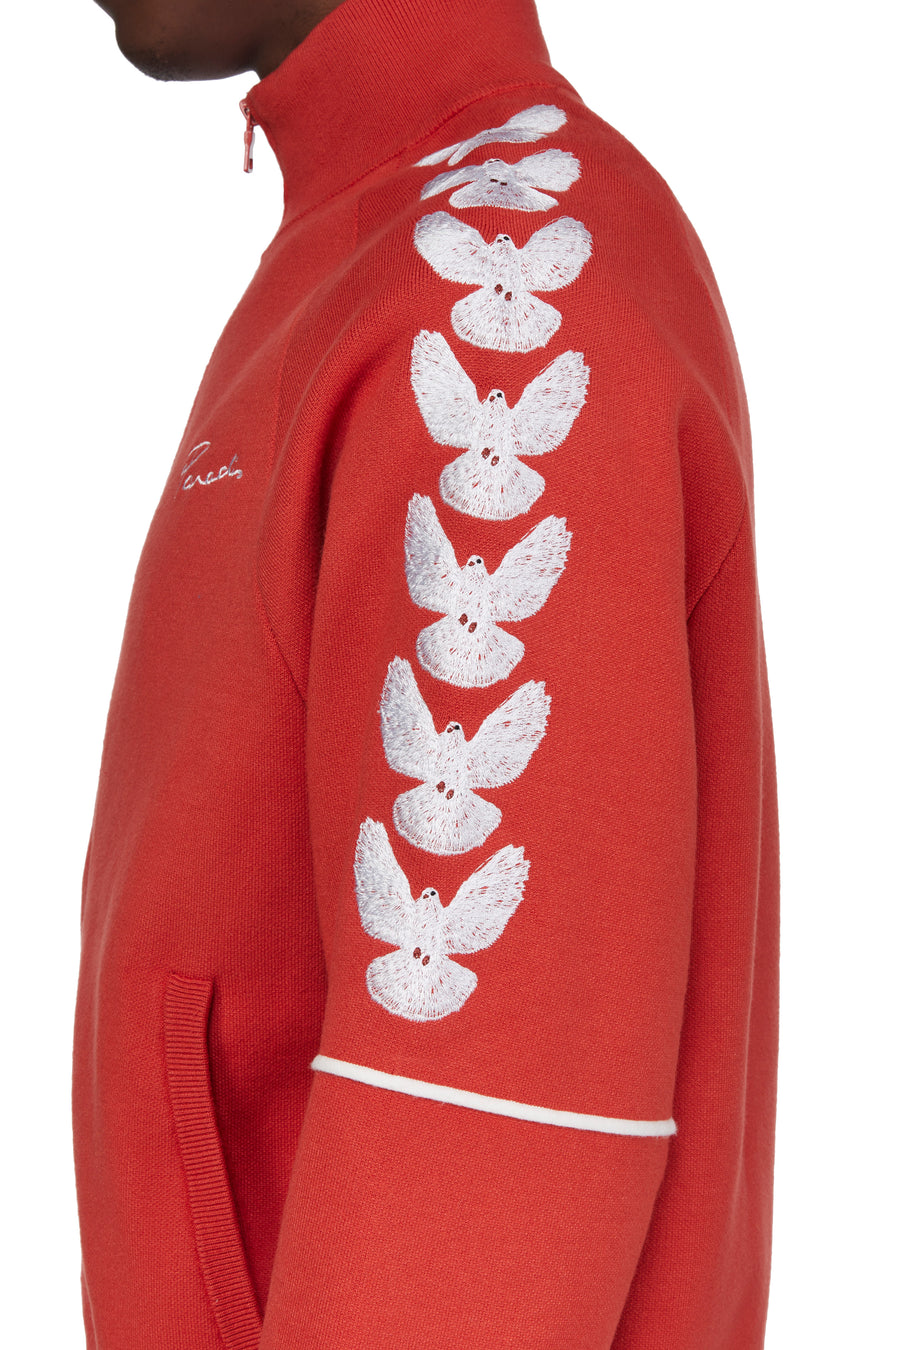 UNITY DOVES RED TRACK JACKET